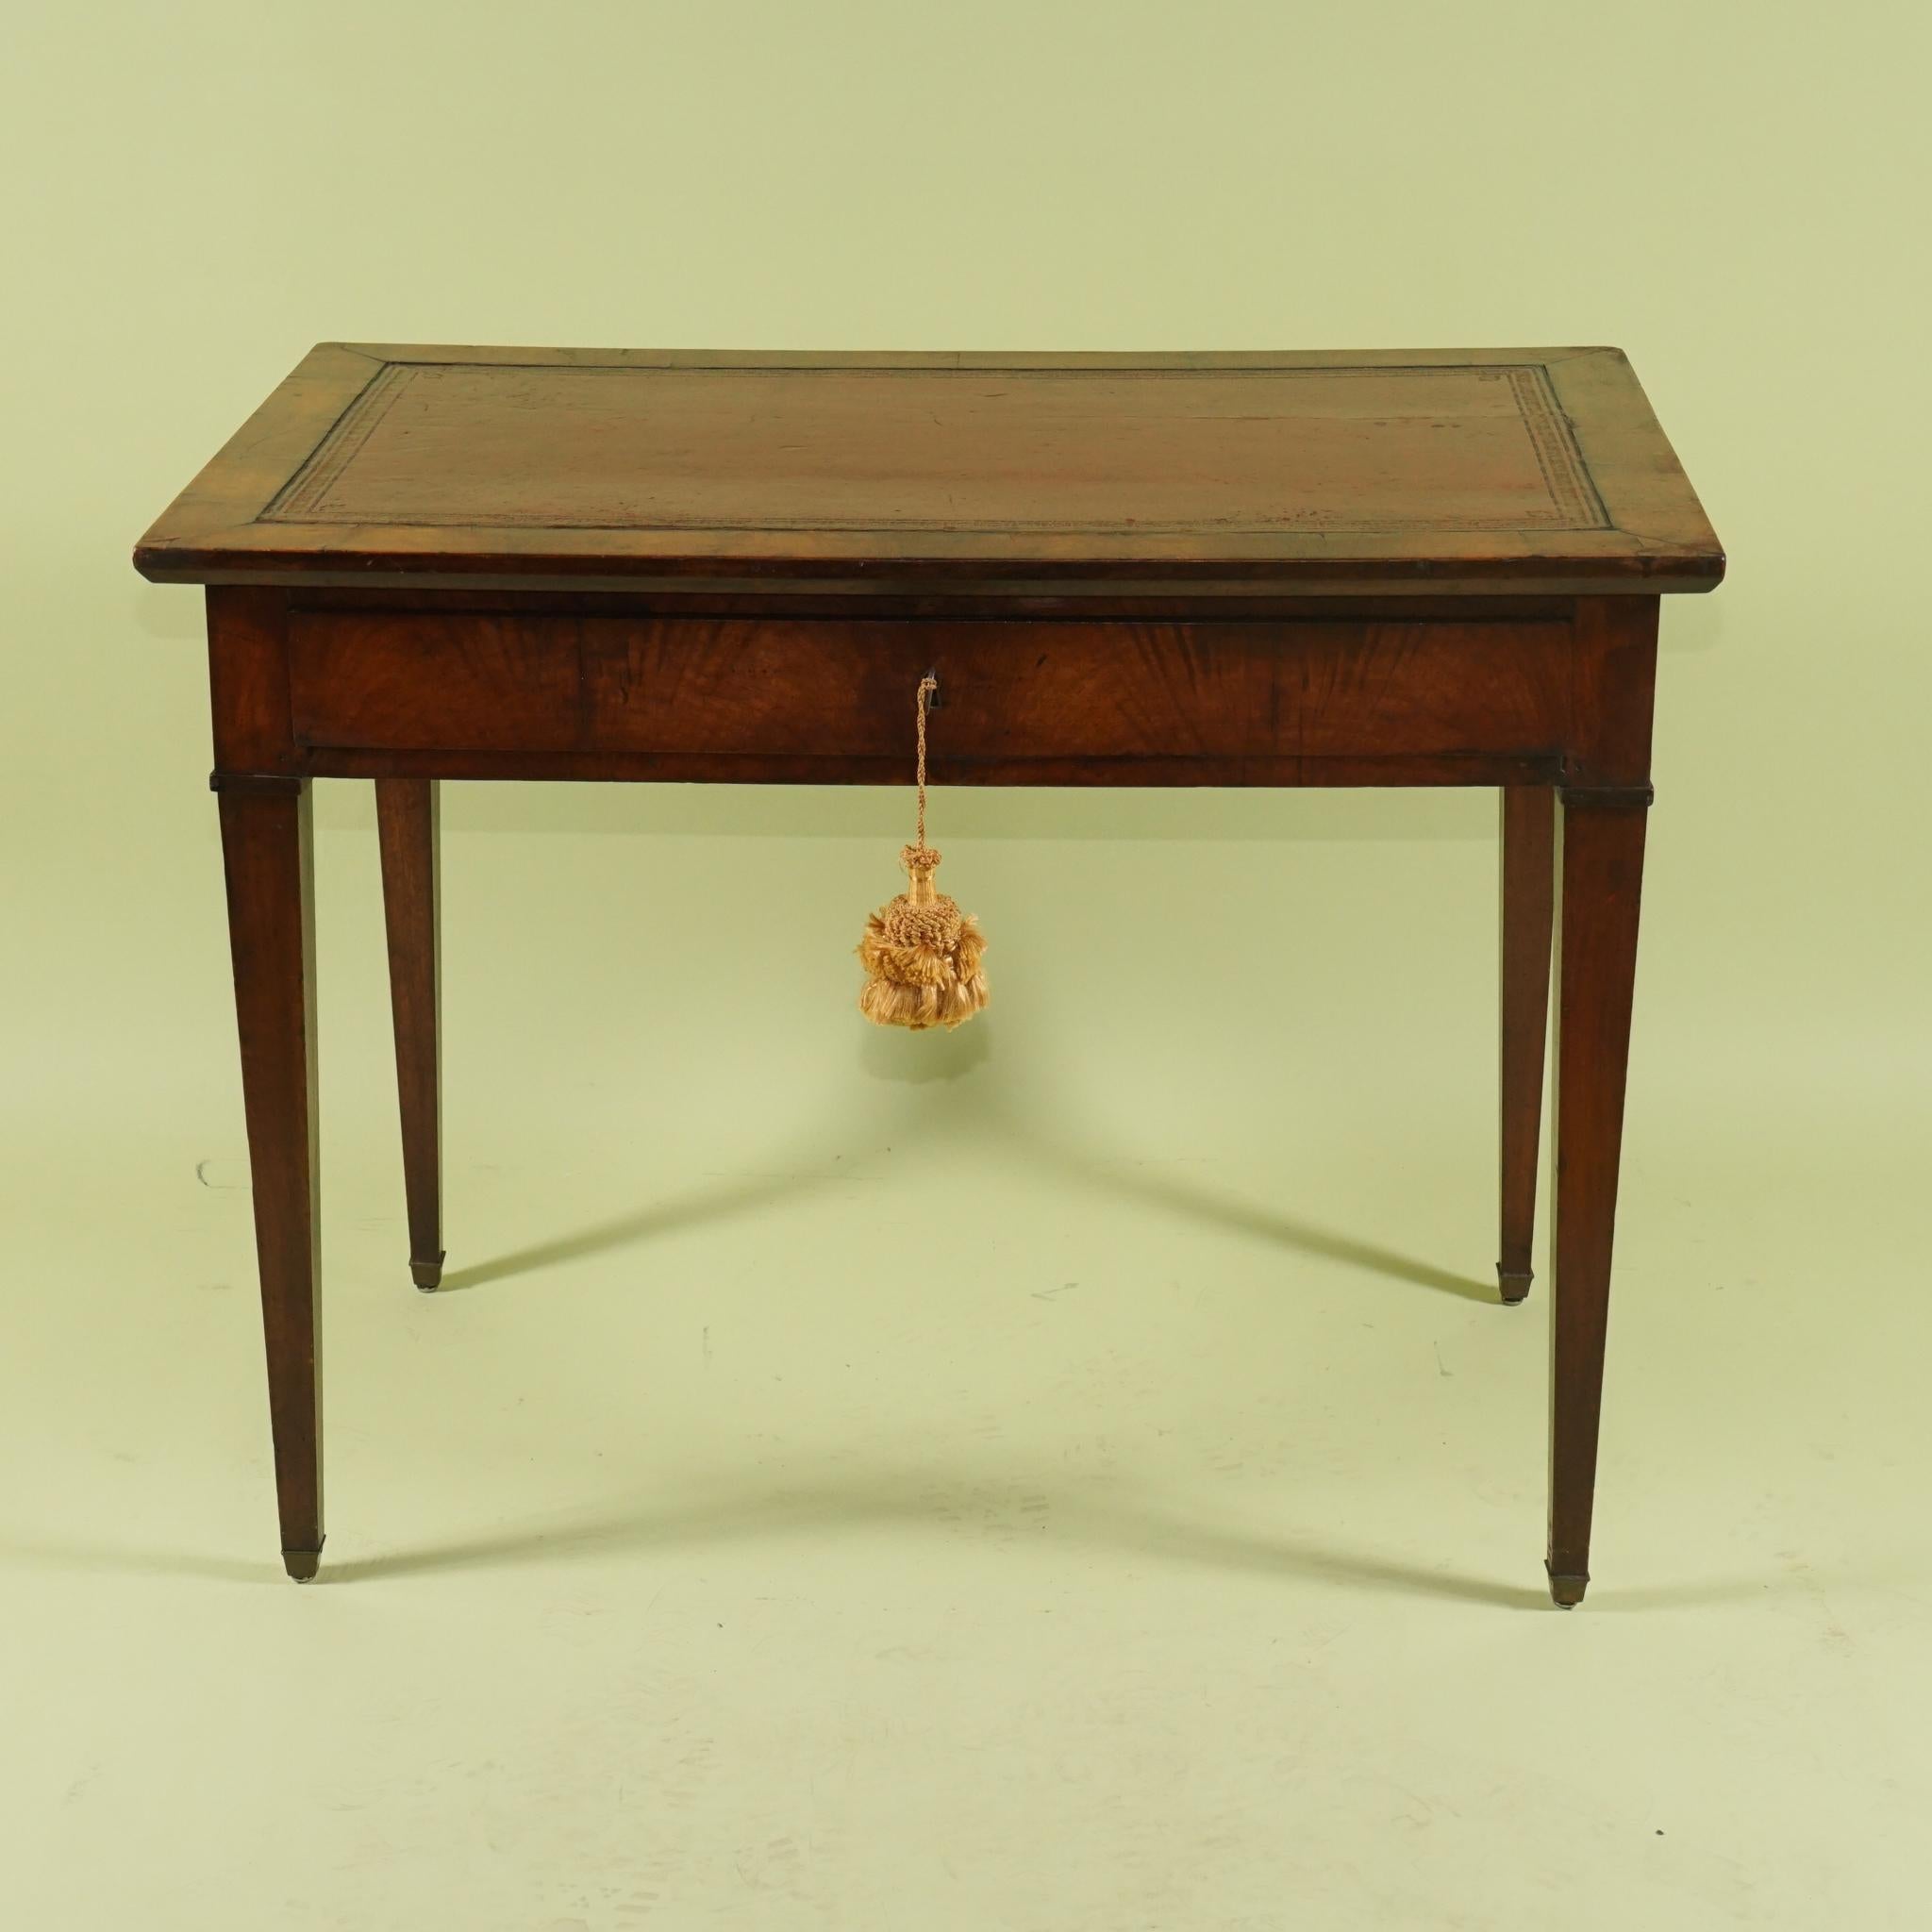 This beautiful period writing table was constructed in France circa 1790 to 1800 of rich imported mahogany and the woods have been carefully selected to create an overall pattern of flaming grain around the apron of the table. The top is covered in